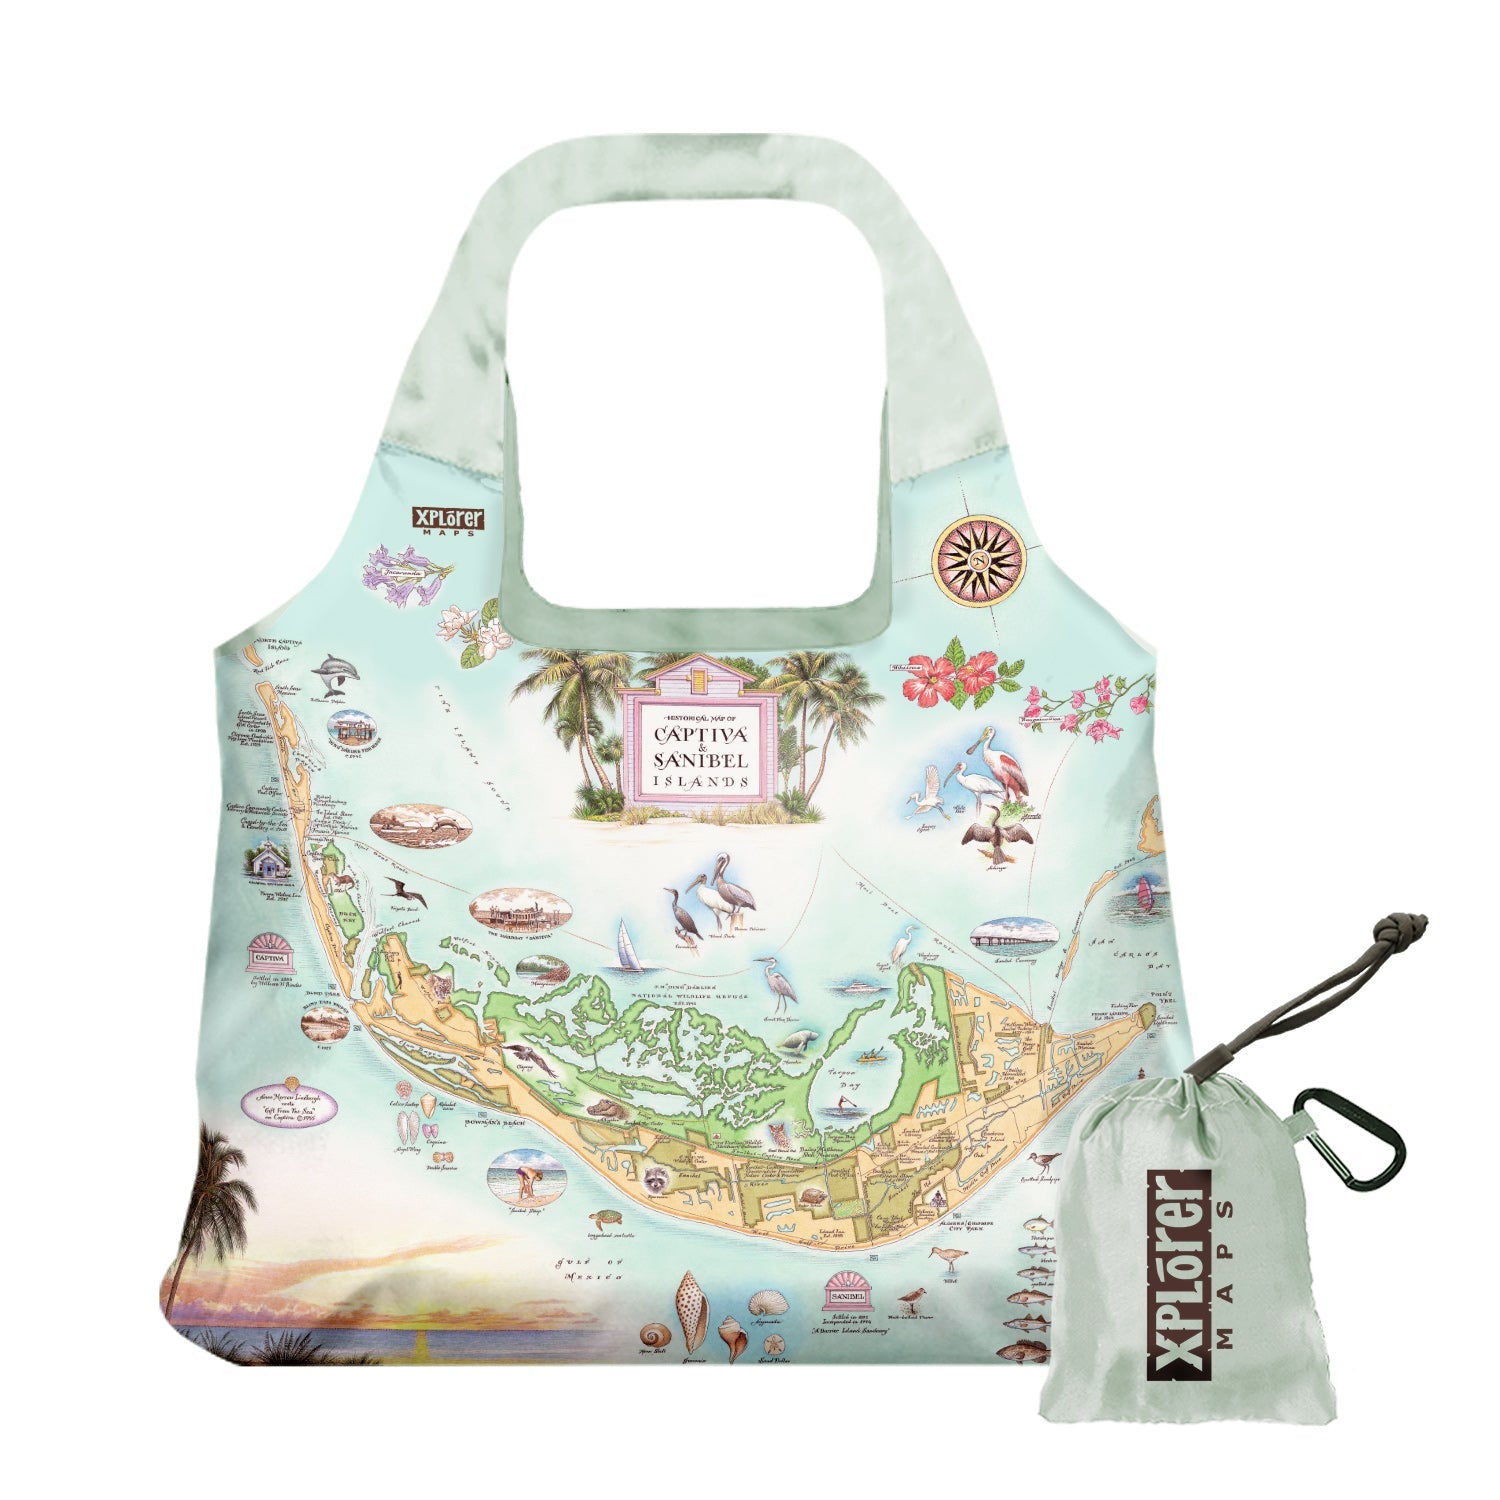 Florida's Sanibel & Captiva Islands Map Pouch Tote Bags by Xplorer Maps. The map features illustrations of places such as Ding Darling Wildlife Sanctuary, Bailey-Matthews Shell Museum, and Sanibel Lighthouse. Flora and fauna include the Loggerhead sea turtle, Manatee, and Great Blue Heron. Many other birds and sea animals are illustrated.